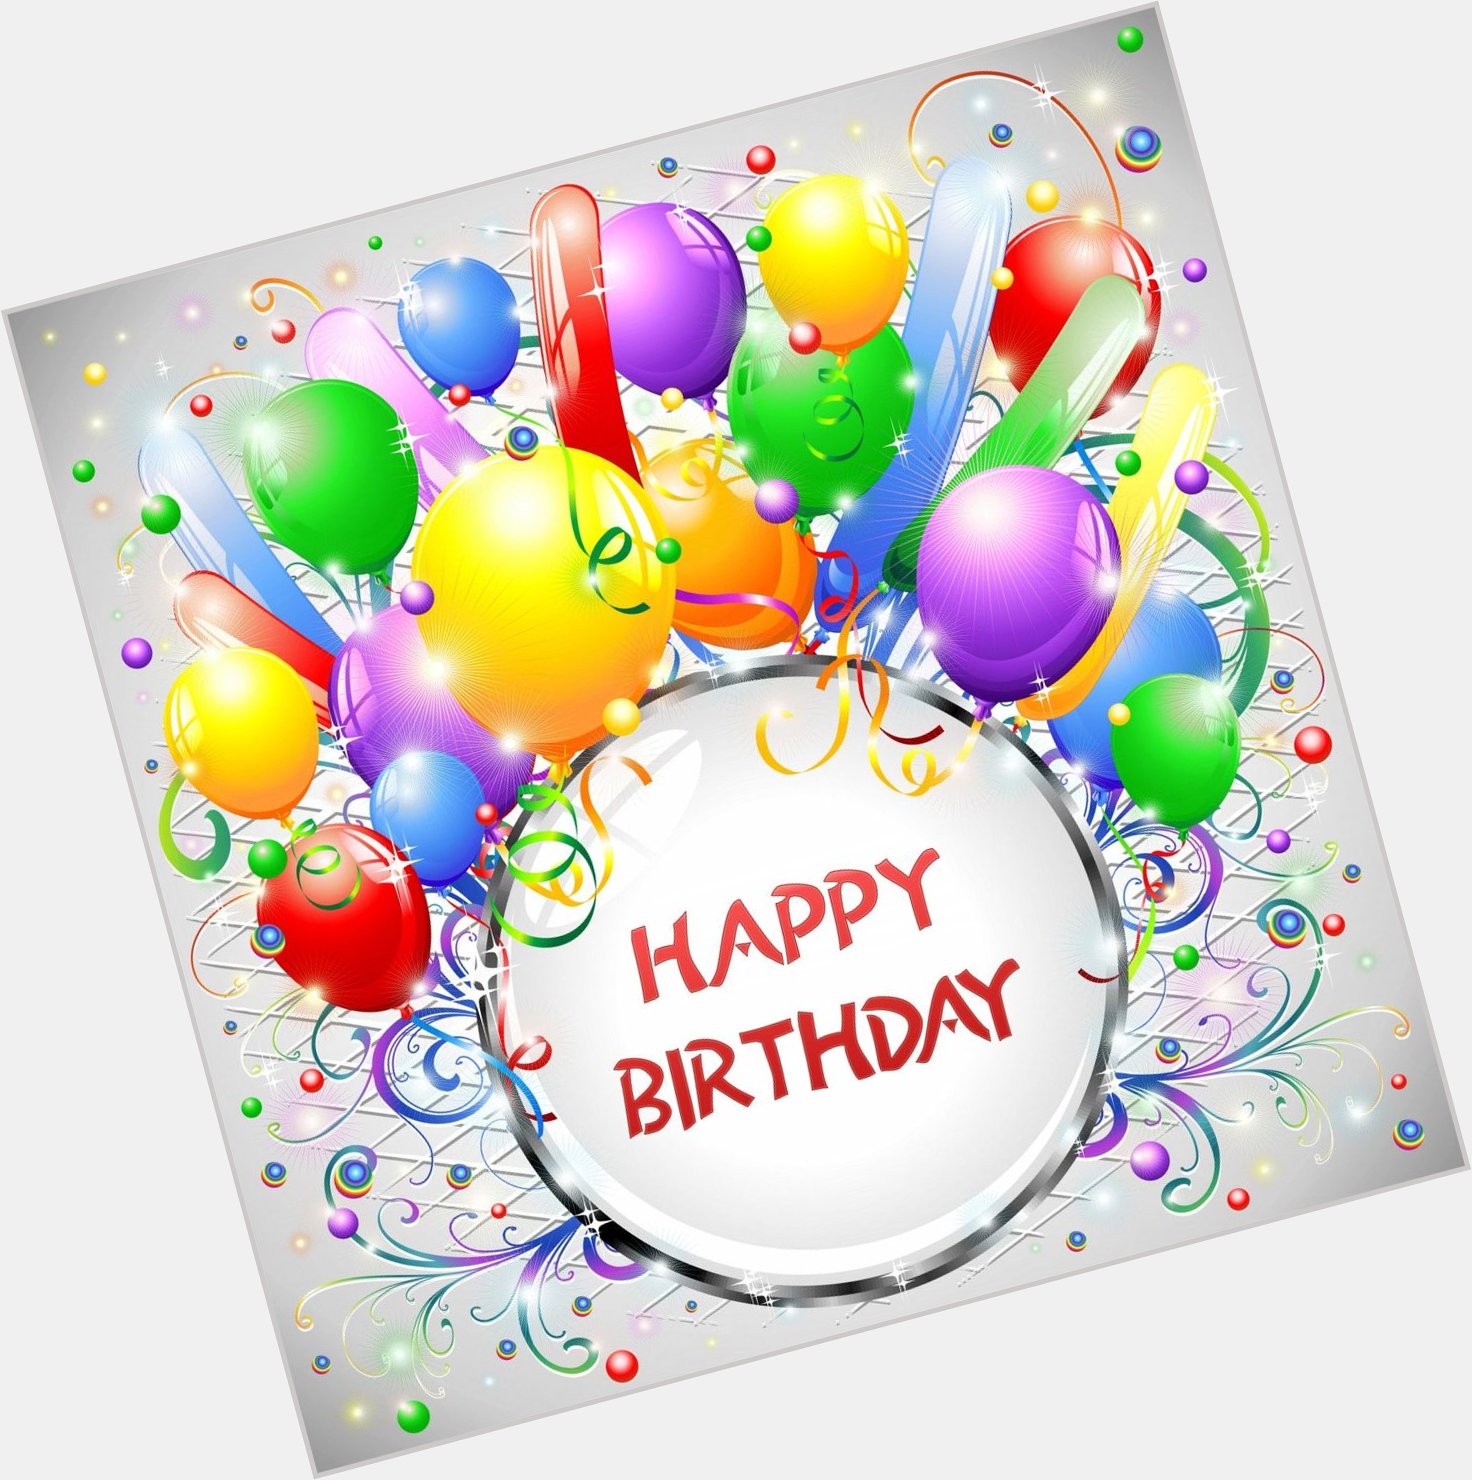 Good morning all. Here\s wishing our beautiful Kristin Kreuk a Very Happy Birthday. Have a wonderful day. 